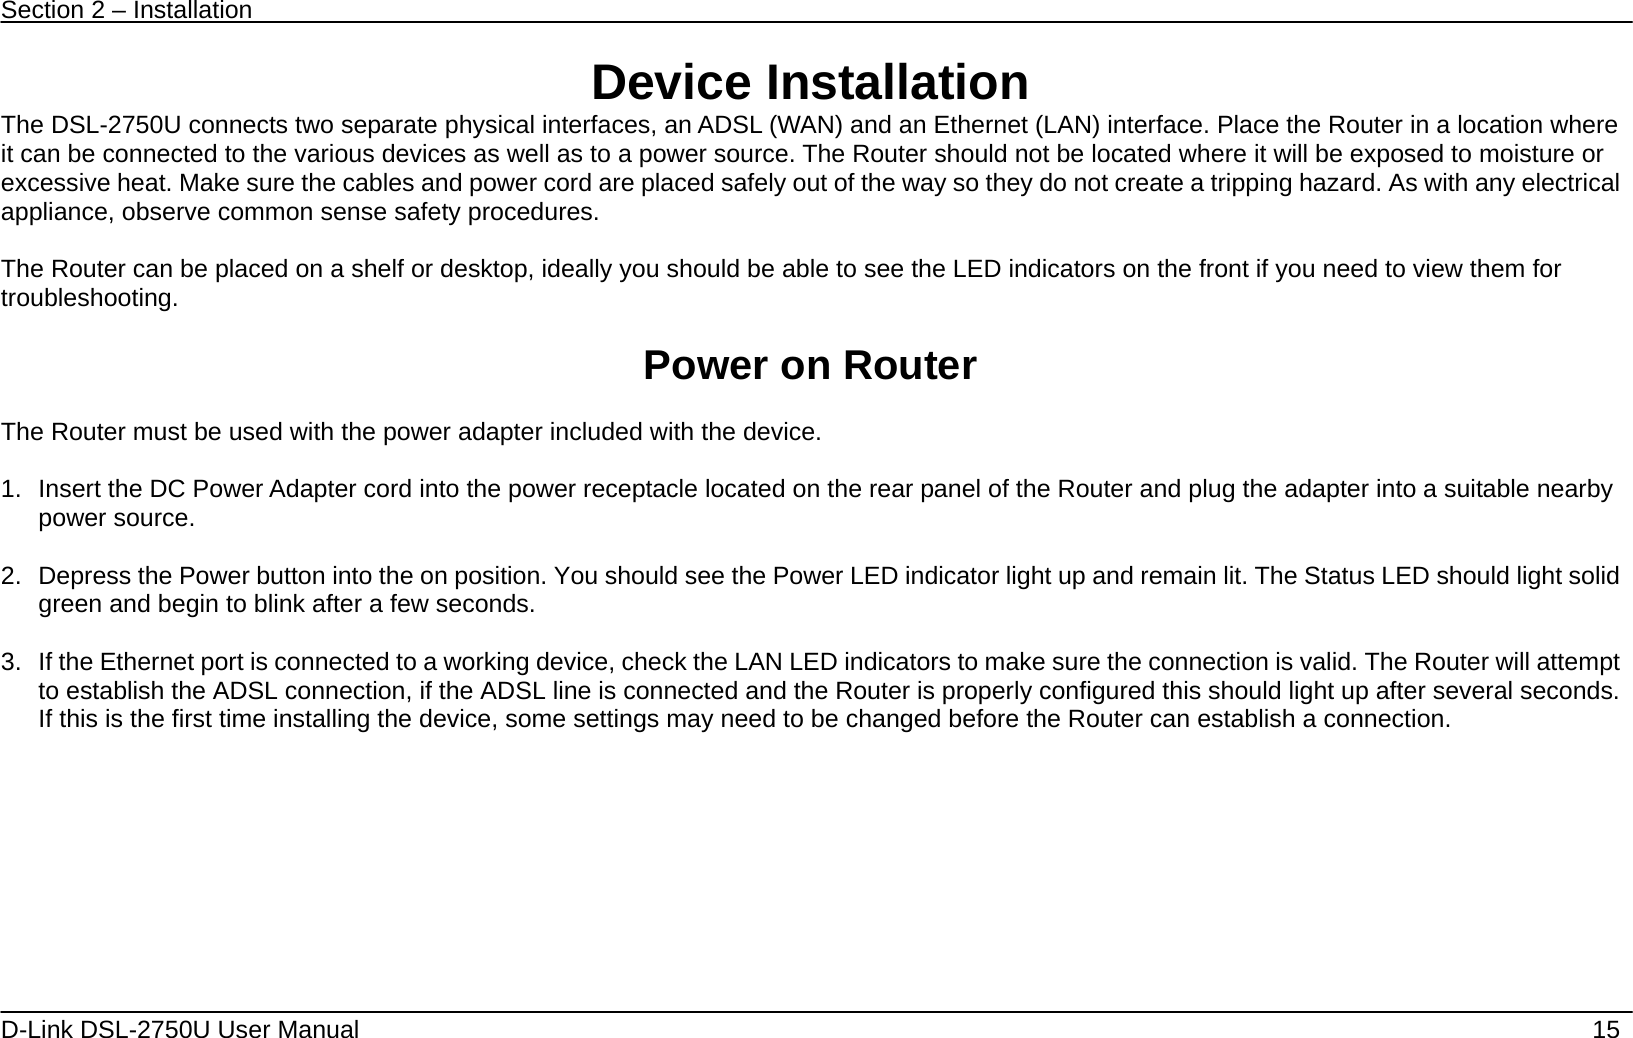 Section 2 – Installation   D-Link DSL-2750U User Manual    15 Device Installation The DSL-2750U connects two separate physical interfaces, an ADSL (WAN) and an Ethernet (LAN) interface. Place the Router in a location where it can be connected to the various devices as well as to a power source. The Router should not be located where it will be exposed to moisture or excessive heat. Make sure the cables and power cord are placed safely out of the way so they do not create a tripping hazard. As with any electrical appliance, observe common sense safety procedures.  The Router can be placed on a shelf or desktop, ideally you should be able to see the LED indicators on the front if you need to view them for troubleshooting.  Power on Router  The Router must be used with the power adapter included with the device.  1.  Insert the DC Power Adapter cord into the power receptacle located on the rear panel of the Router and plug the adapter into a suitable nearby power source.  2.  Depress the Power button into the on position. You should see the Power LED indicator light up and remain lit. The Status LED should light solid green and begin to blink after a few seconds.  3.  If the Ethernet port is connected to a working device, check the LAN LED indicators to make sure the connection is valid. The Router will attempt to establish the ADSL connection, if the ADSL line is connected and the Router is properly configured this should light up after several seconds. If this is the first time installing the device, some settings may need to be changed before the Router can establish a connection.    